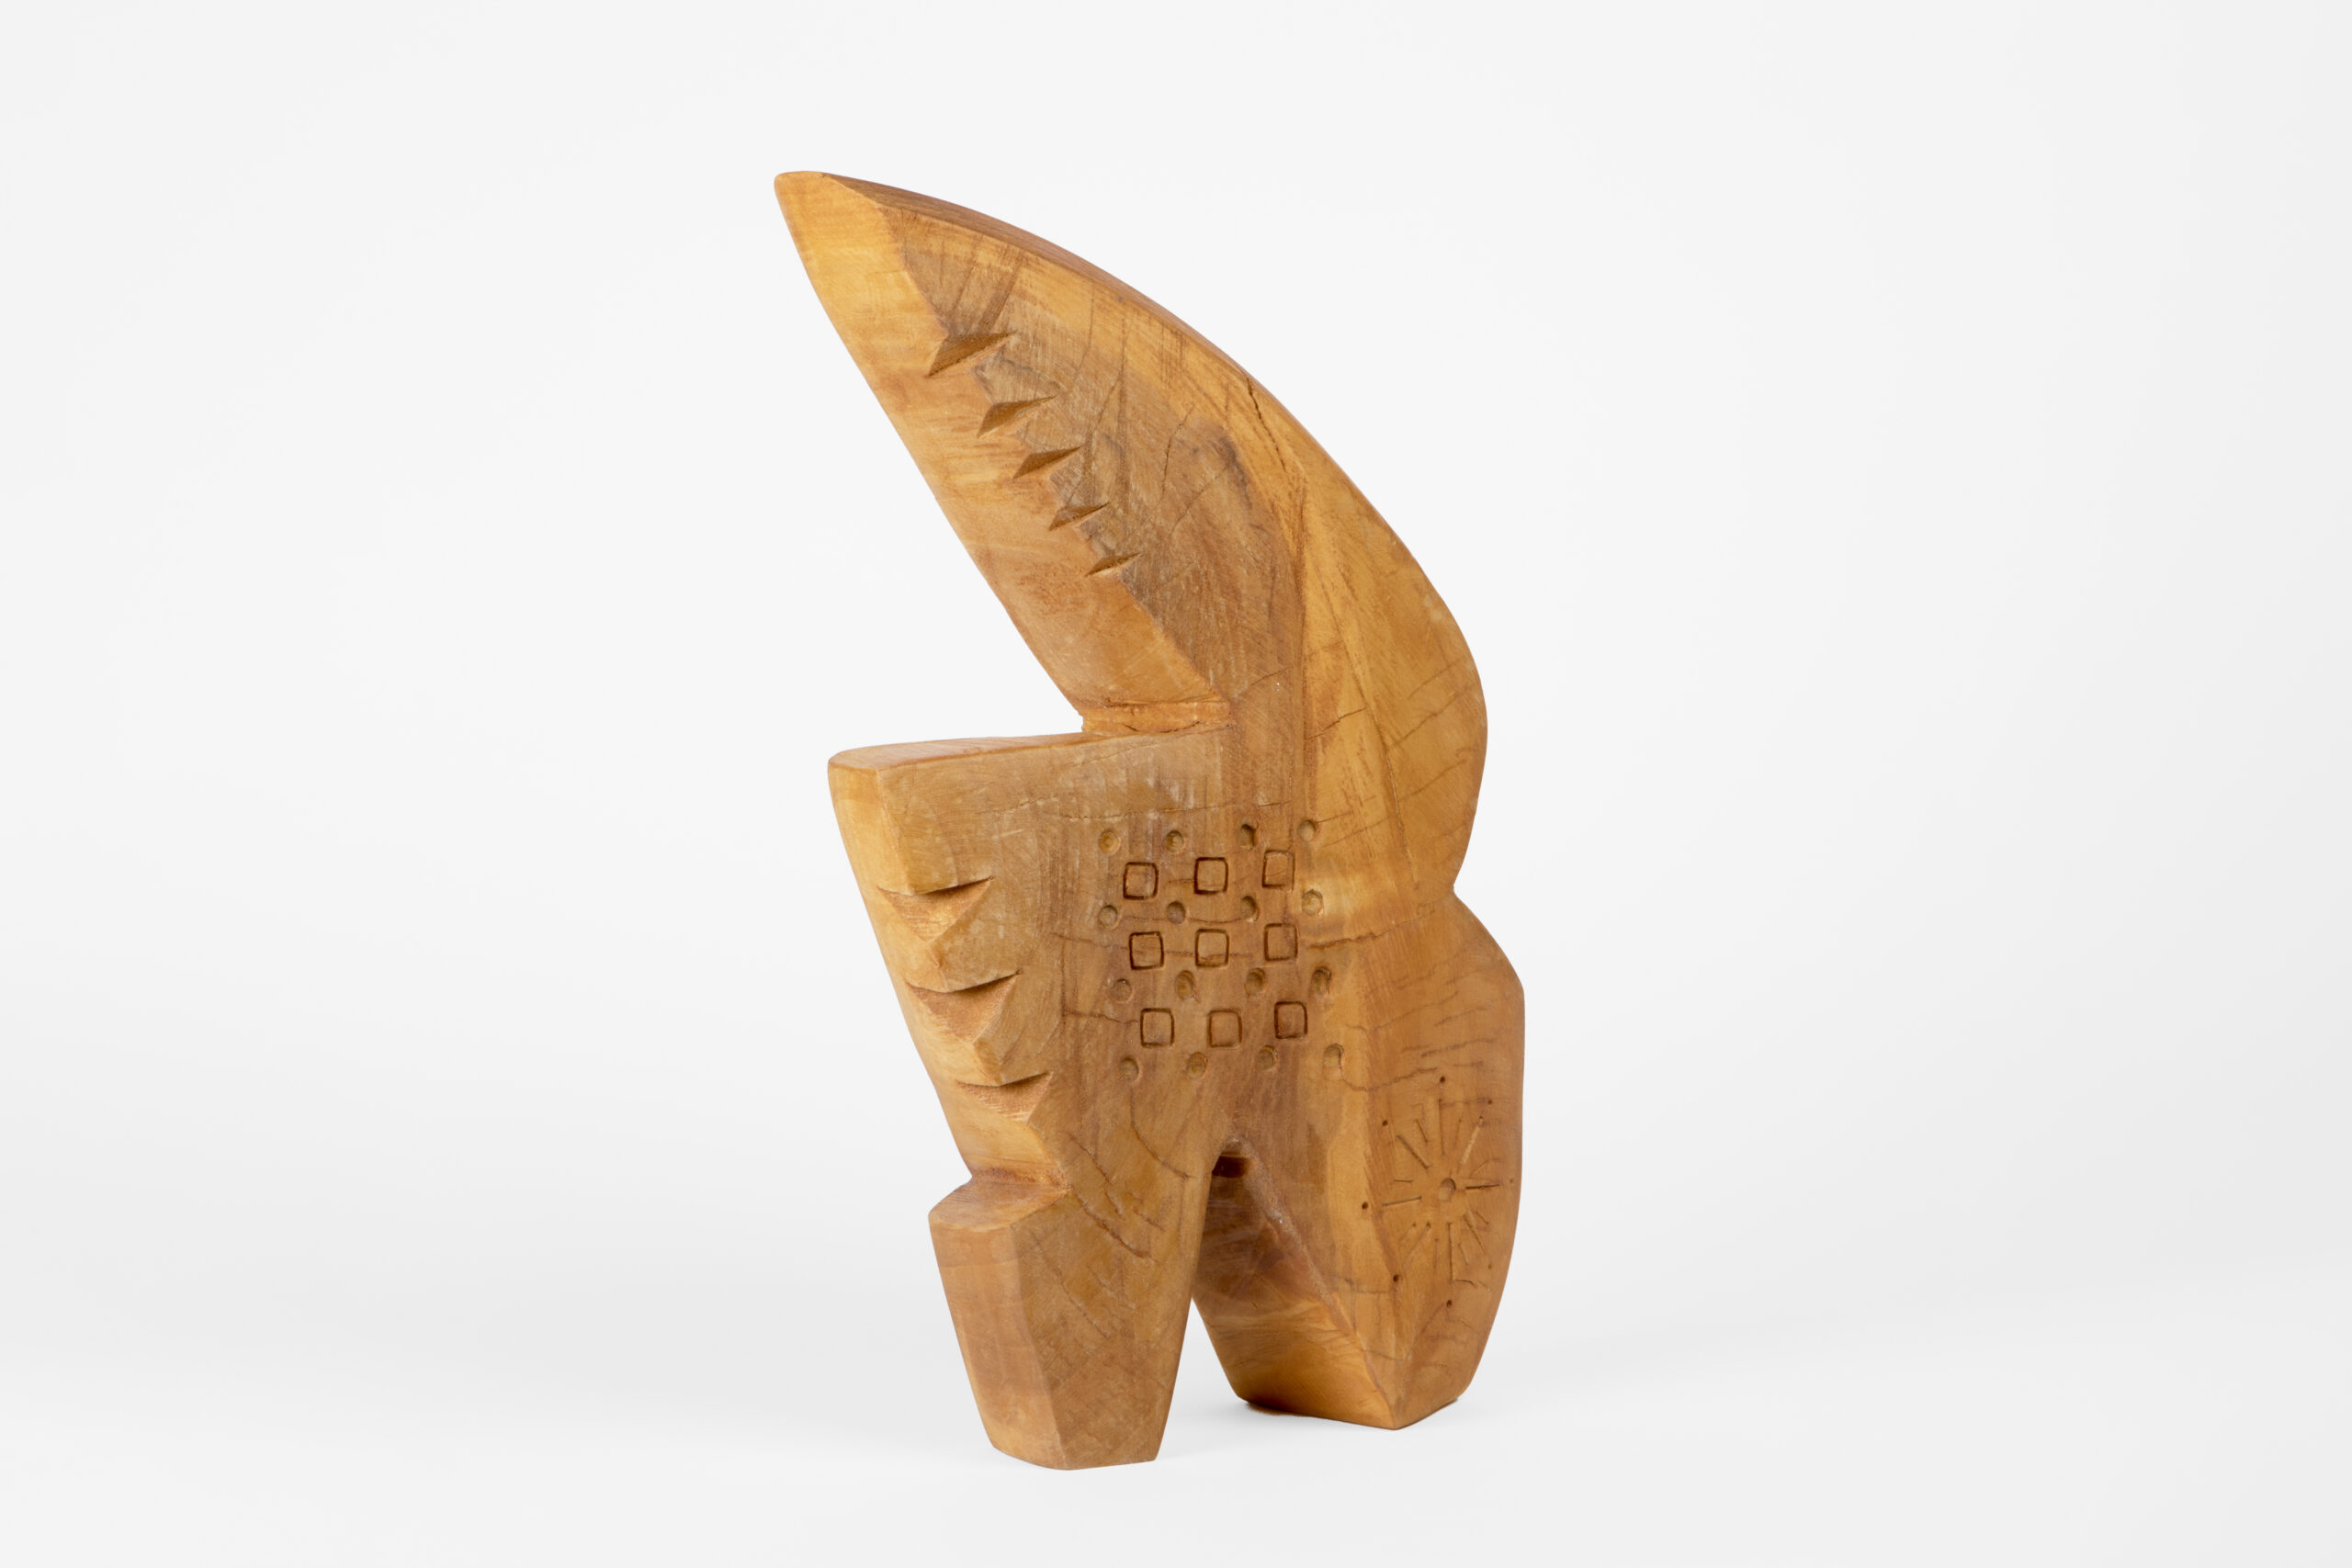 
		                					Randall Wilson		                																	
																											<i>Untitled,</i>  
																																								2023, 
																																								Cottonwood with shellac, 
																																								15 3/4 x 9 1/2 x 4 inches 
																								
		                				